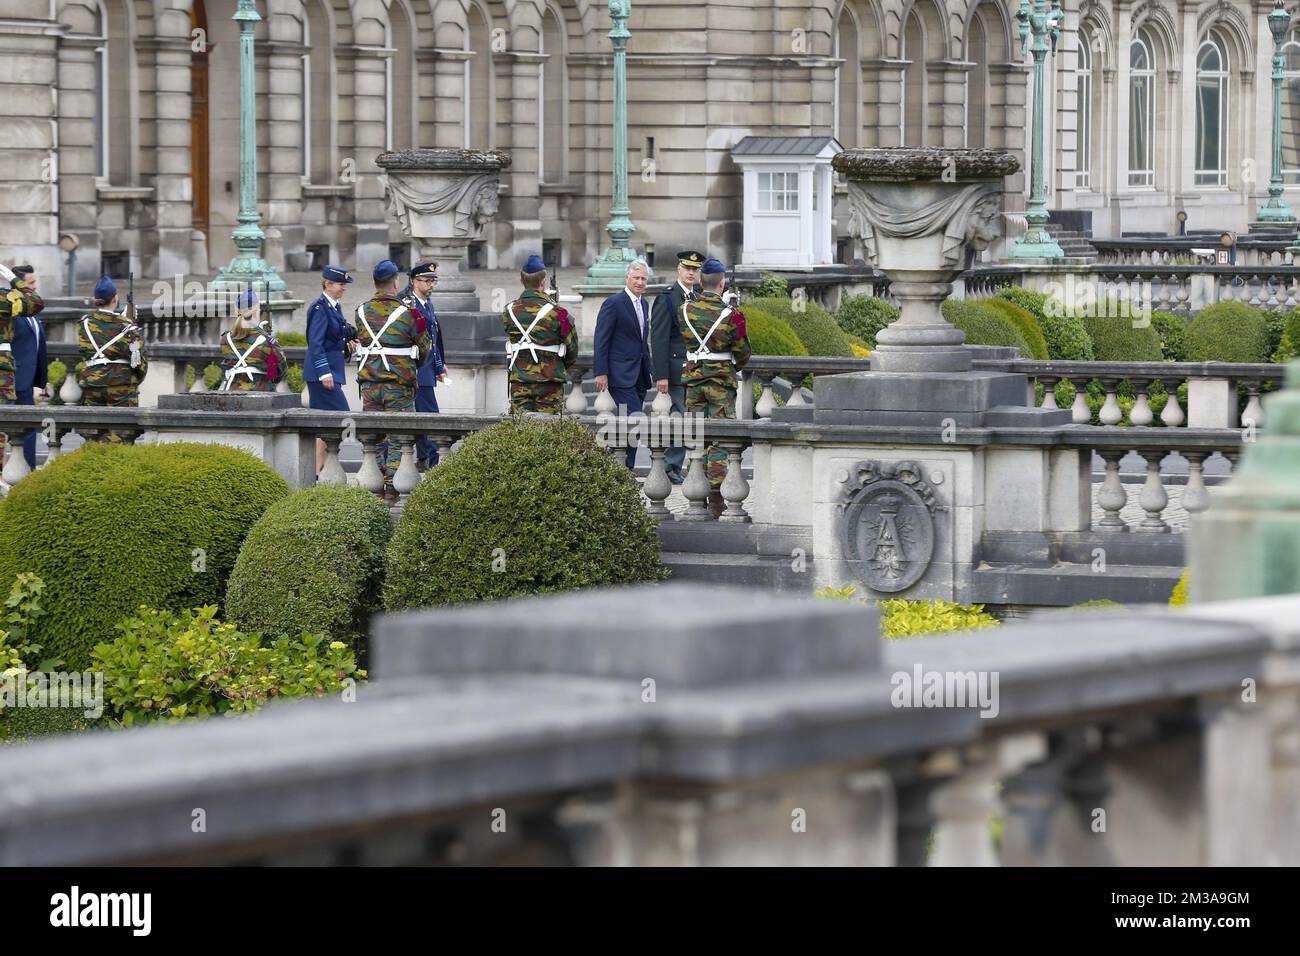 King Philippe - Filip of Belgium (3L) arrives for a ceremony to award the 'Francqui Prize' scientific awards for 2021 and 2022, Wednesday 01 June 2022 in Brussels. The 2021 prize is awarded to ULiege astrologist Michael Gillon, ULiege's Veerle Rots will receive the 2022 one for her Palaeolithic Stone Tool Hafting research. The scientific prize, which is often referred to as the 'Belgian Nobel Prize', is awarded by The Francqui Foundation and is worth 250.000 euros. BELGA PHOTO NICOLAS MAETERLINCK Stock Photo